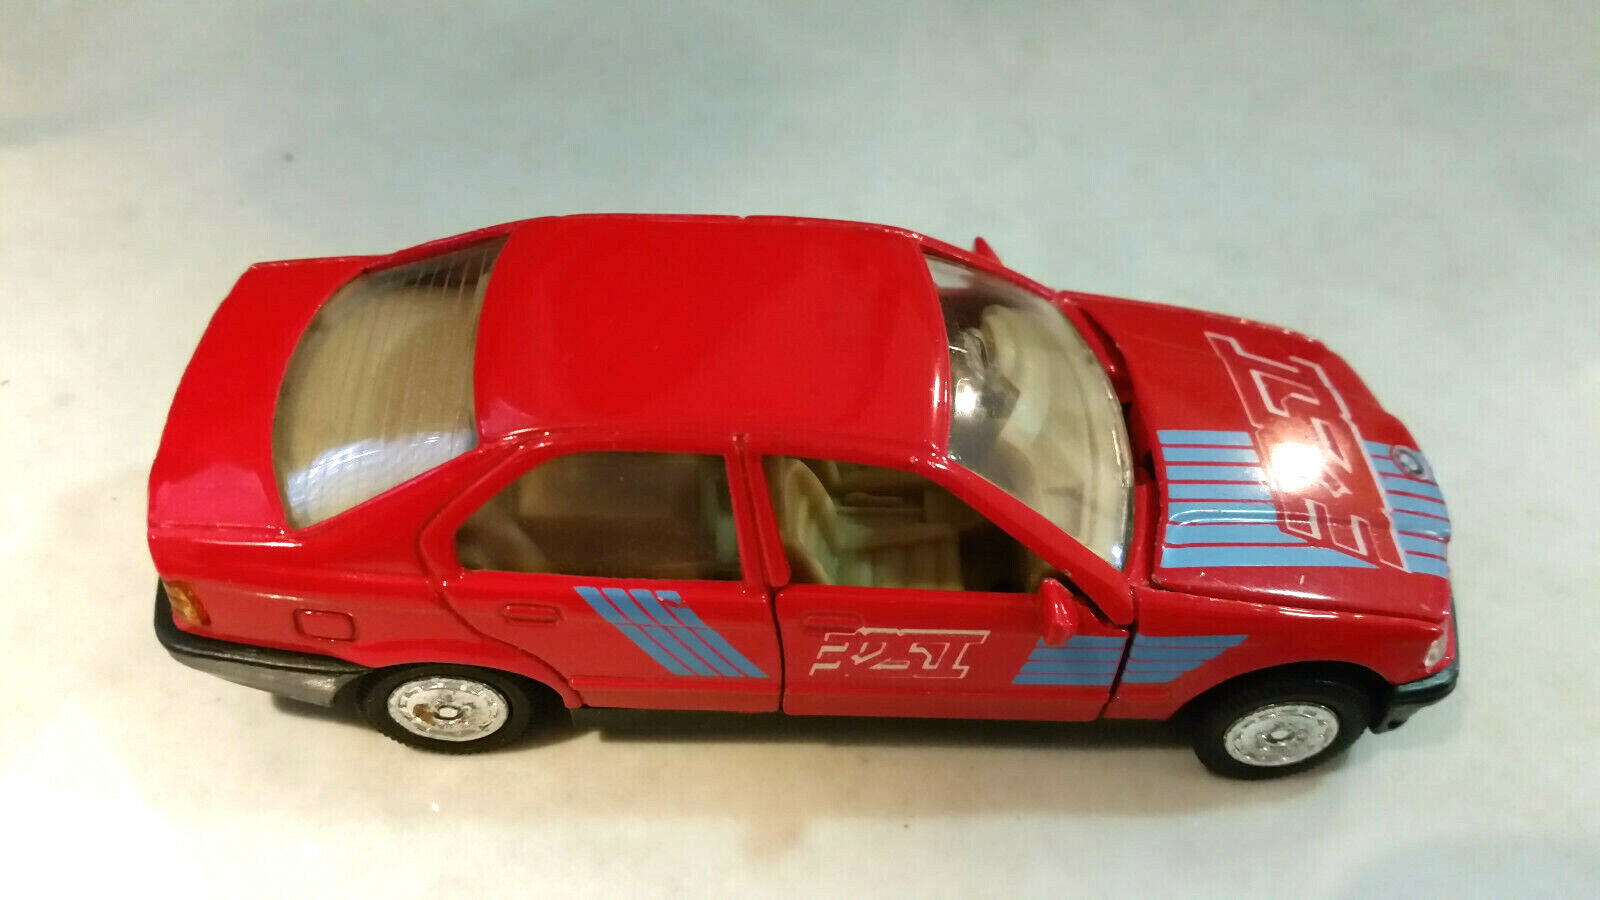  BMW 325i Welly 9042 1/36 Diecast METAL  Mint Loose  4.6\'\' PULL BACK ACTION RED